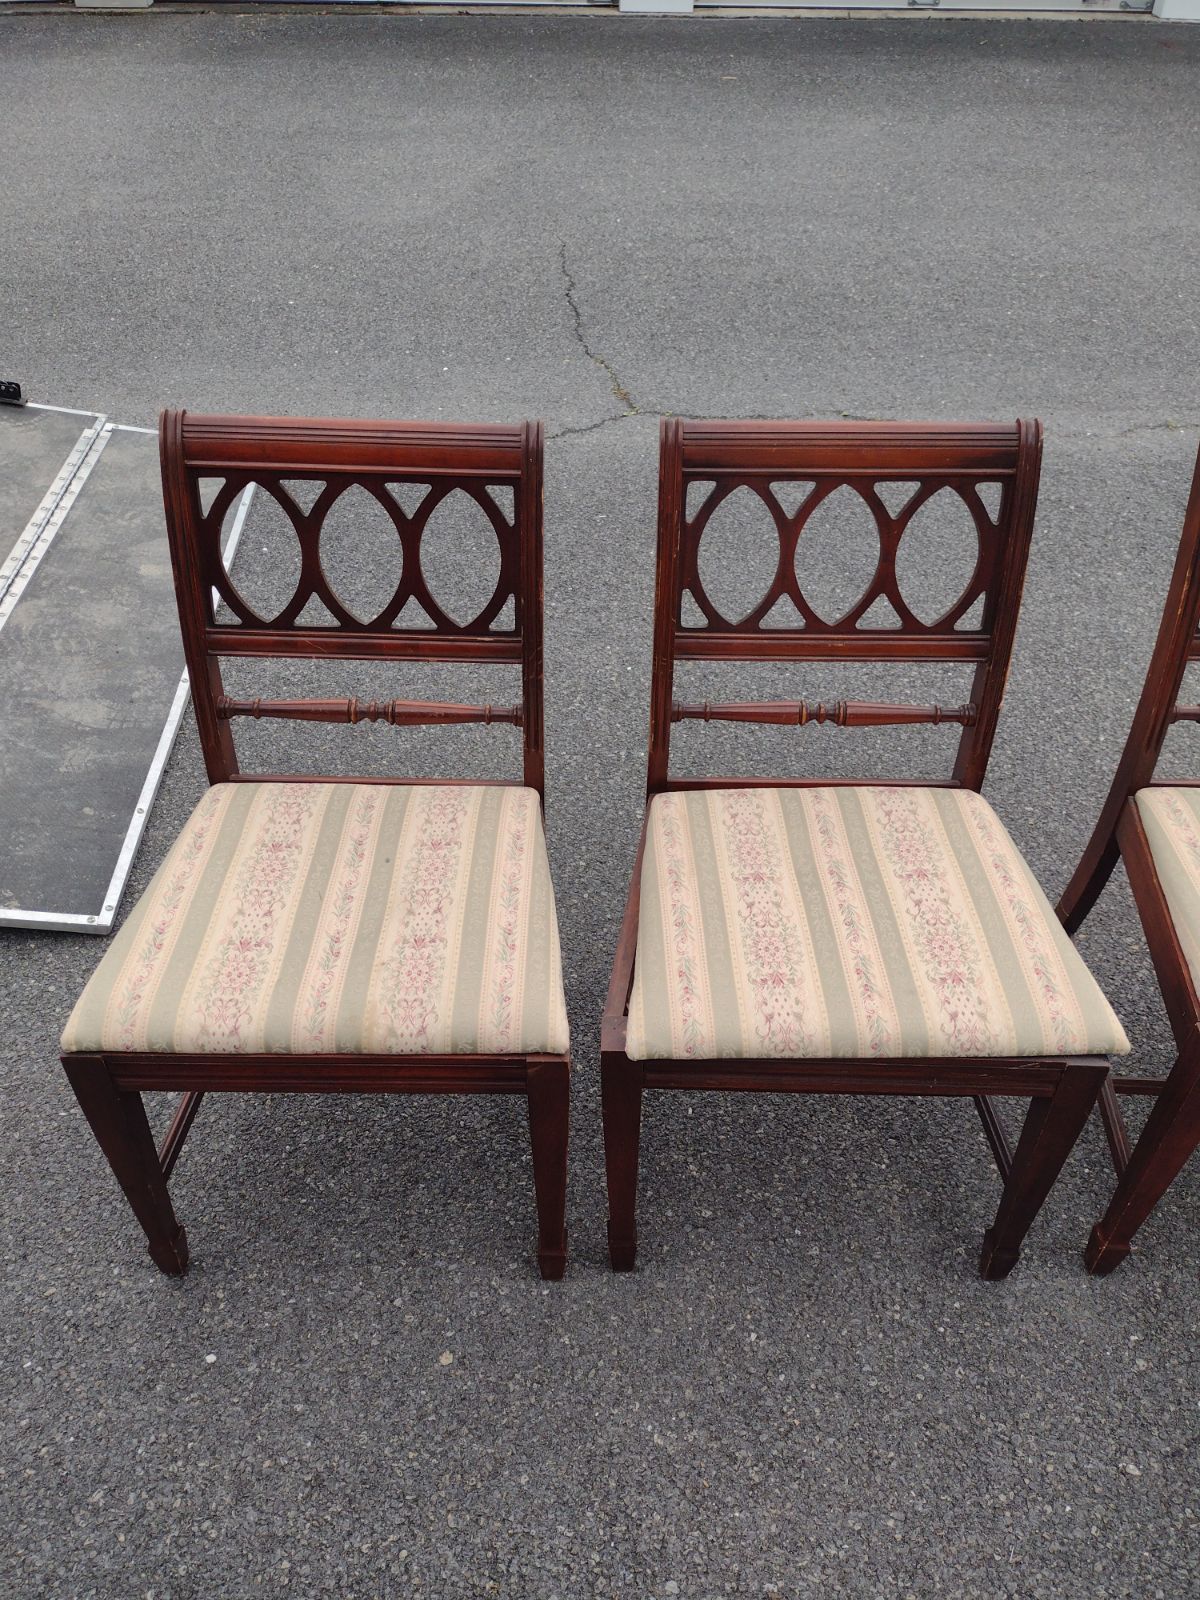 Antique Chairs Of 4